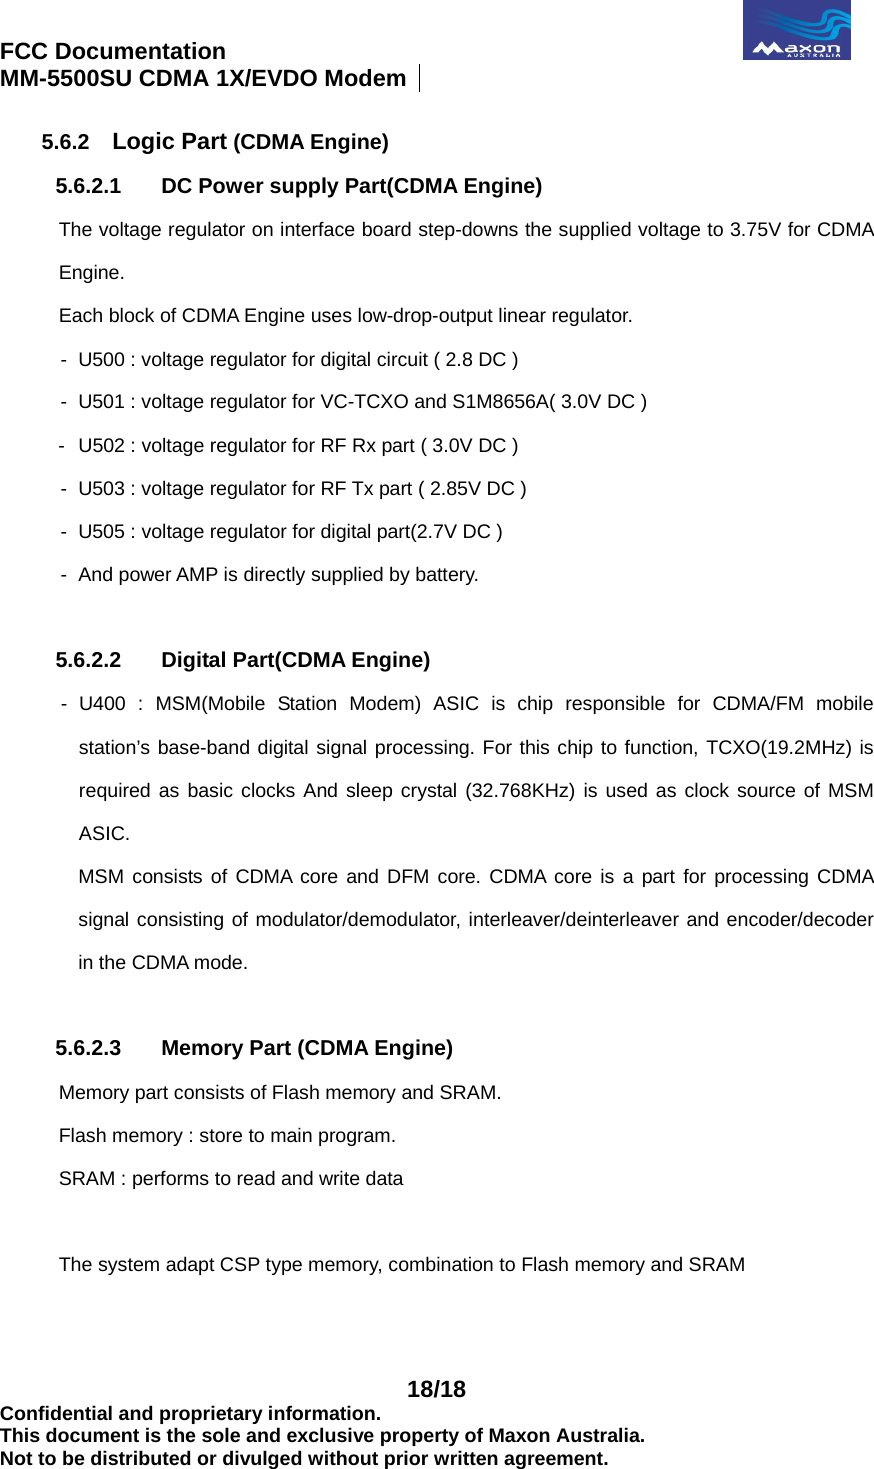 FCC Documentation                                              MM-5500SU CDMA 1X/EVDO Modem    18/18 Confidential and proprietary information. This document is the sole and exclusive property of Maxon Australia. Not to be distributed or divulged without prior written agreement. 5.6.2  Logic Part (CDMA Engine) 5.6.2.1  DC Power supply Part(CDMA Engine) The voltage regulator on interface board step-downs the supplied voltage to 3.75V for CDMA Engine. Each block of CDMA Engine uses low-drop-output linear regulator. -   U500 : voltage regulator for digital circuit ( 2.8 DC )   -   U501 : voltage regulator for VC-TCXO and S1M8656A( 3.0V DC ) -  U502 : voltage regulator for RF Rx part ( 3.0V DC ) -  U503 : voltage regulator for RF Tx part ( 2.85V DC ) -  U505 : voltage regulator for digital part(2.7V DC ) -  And power AMP is directly supplied by battery.  5.6.2.2  Digital Part(CDMA Engine) -  U400 : MSM(Mobile Station Modem) ASIC is chip responsible for CDMA/FM mobile station’s base-band digital signal processing. For this chip to function, TCXO(19.2MHz) is required as basic clocks And sleep crystal (32.768KHz) is used as clock source of MSM ASIC. MSM consists of CDMA core and DFM core. CDMA core is a part for processing CDMA signal consisting of modulator/demodulator, interleaver/deinterleaver and encoder/decoder in the CDMA mode.  5.6.2.3  Memory Part (CDMA Engine) Memory part consists of Flash memory and SRAM.   Flash memory : store to main program.       SRAM : performs to read and write data  The system adapt CSP type memory, combination to Flash memory and SRAM   